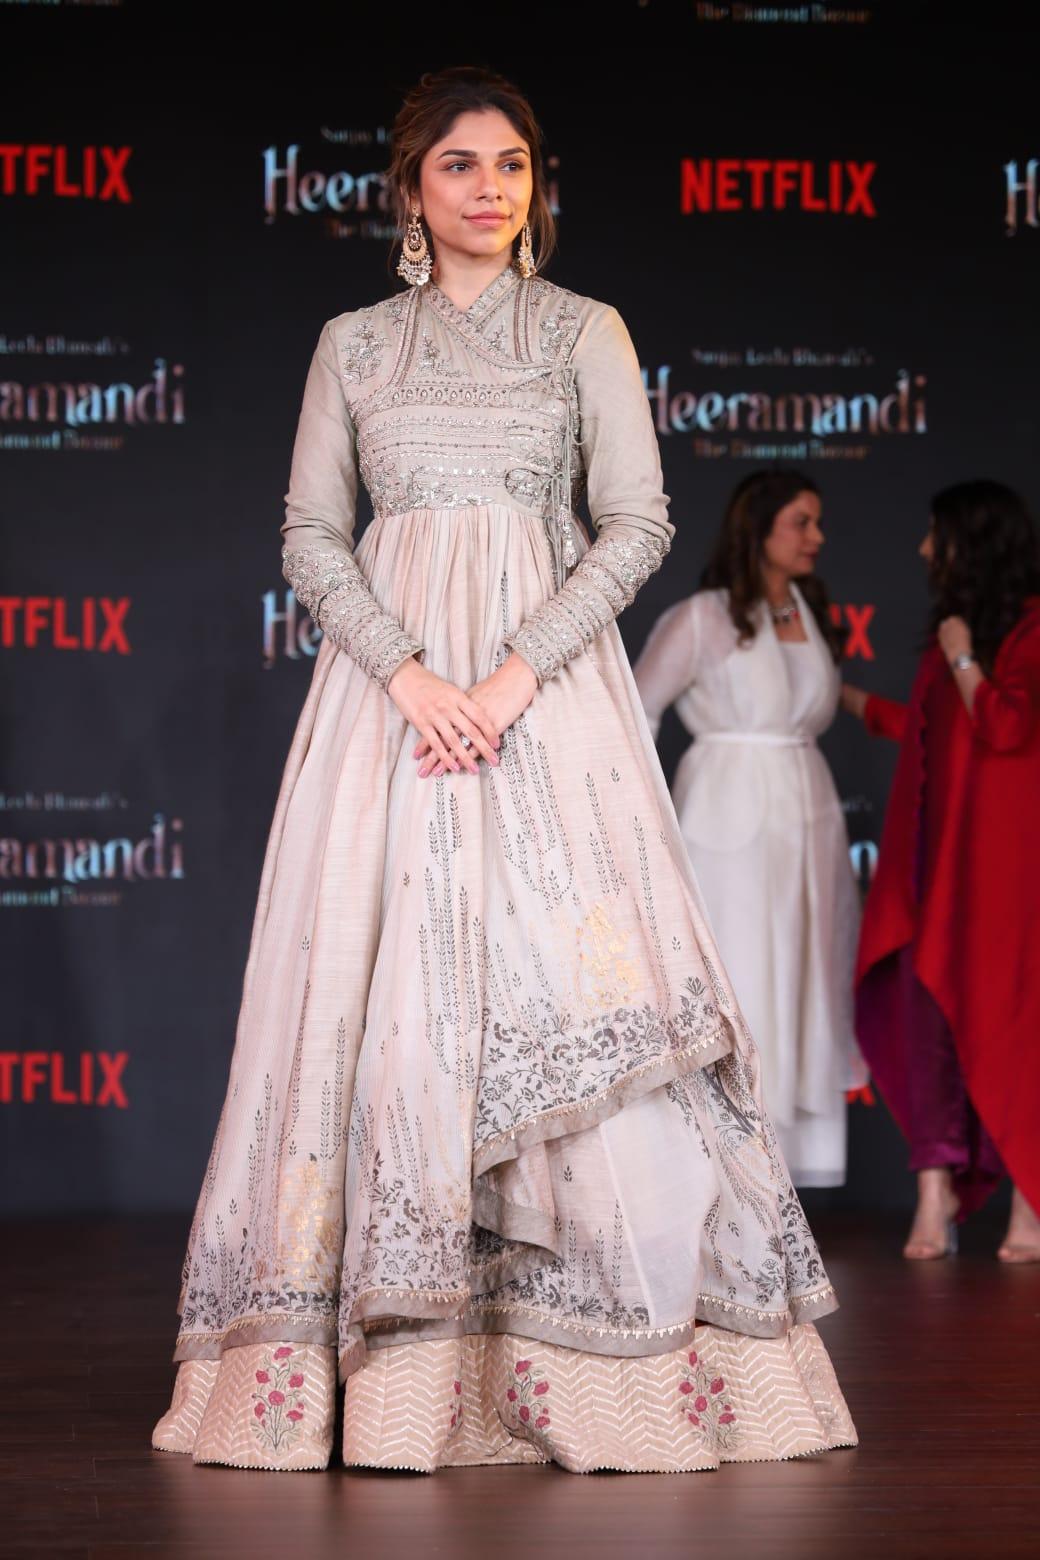 Sharmin Segal, who also plays a pivotal role in the film, was present at the event. The actress wore a heavily embroidered ethnic outfit for her look of the day